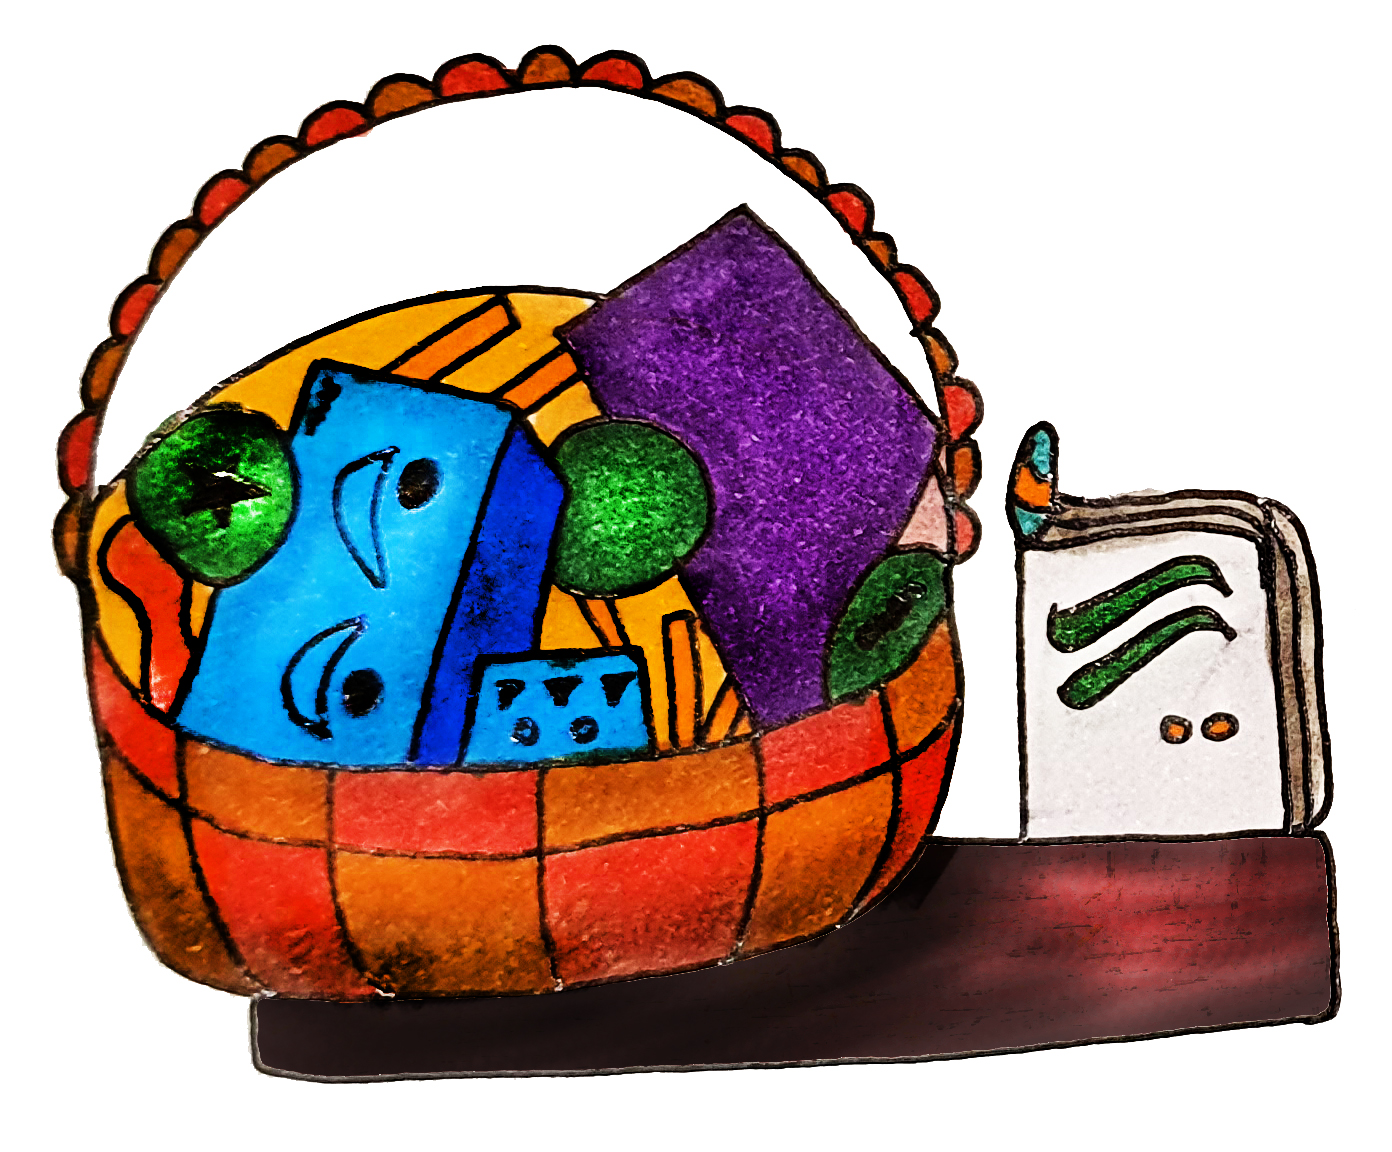 Basket with goods